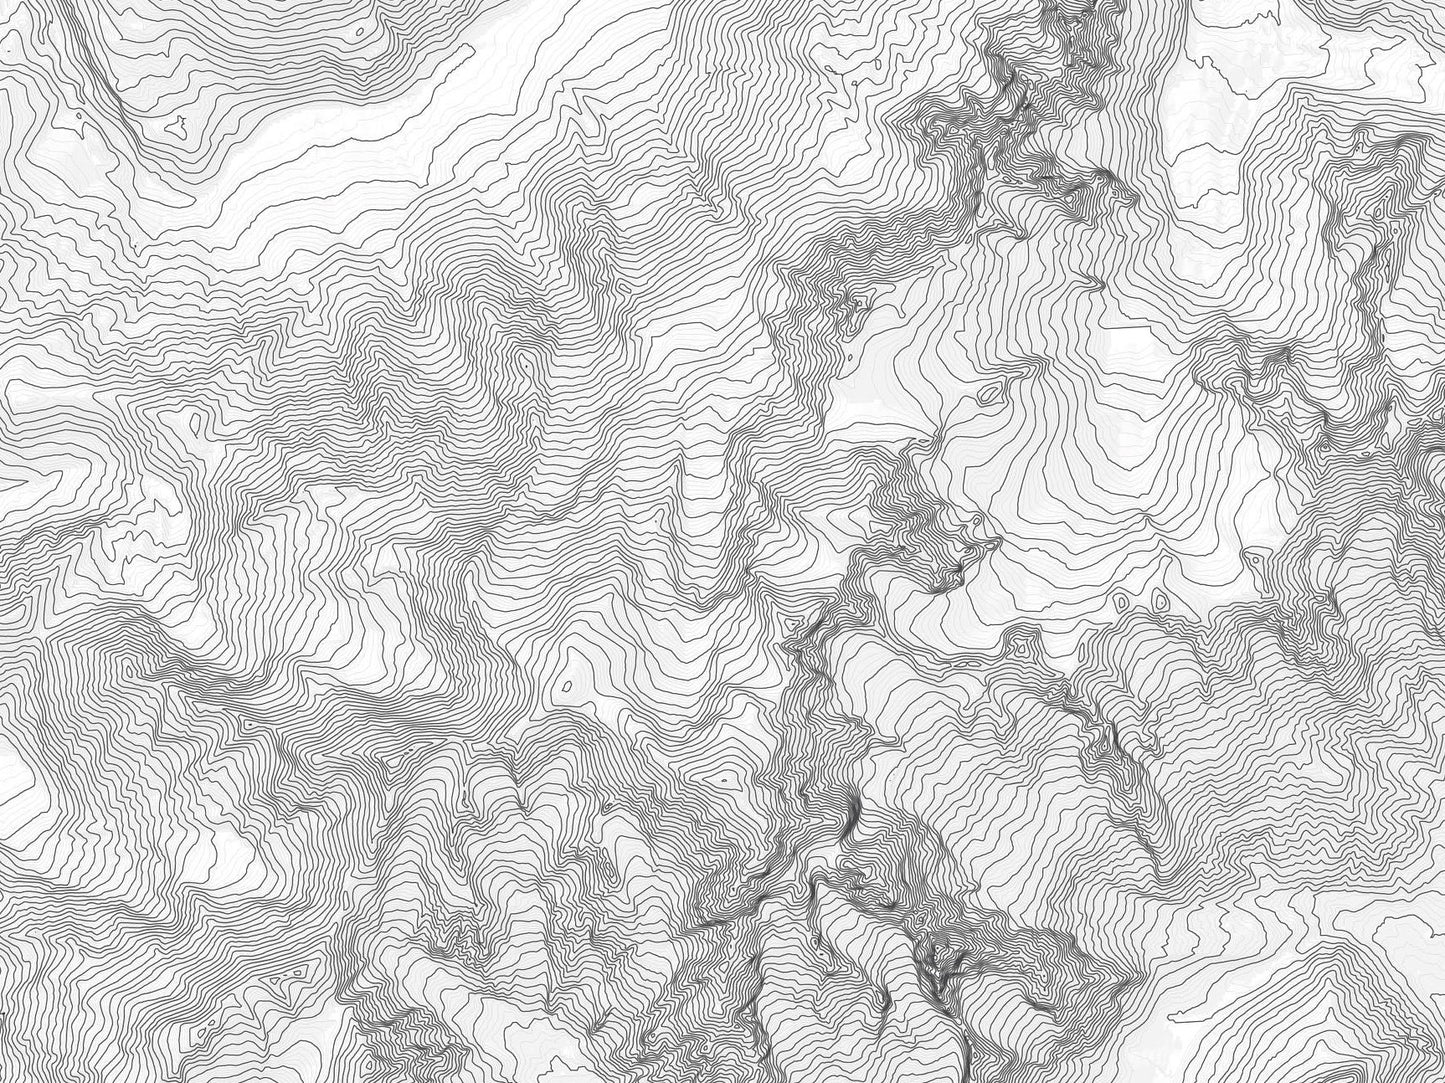 Mont Blanc, France Italy Topography Elevation Print Wall Art